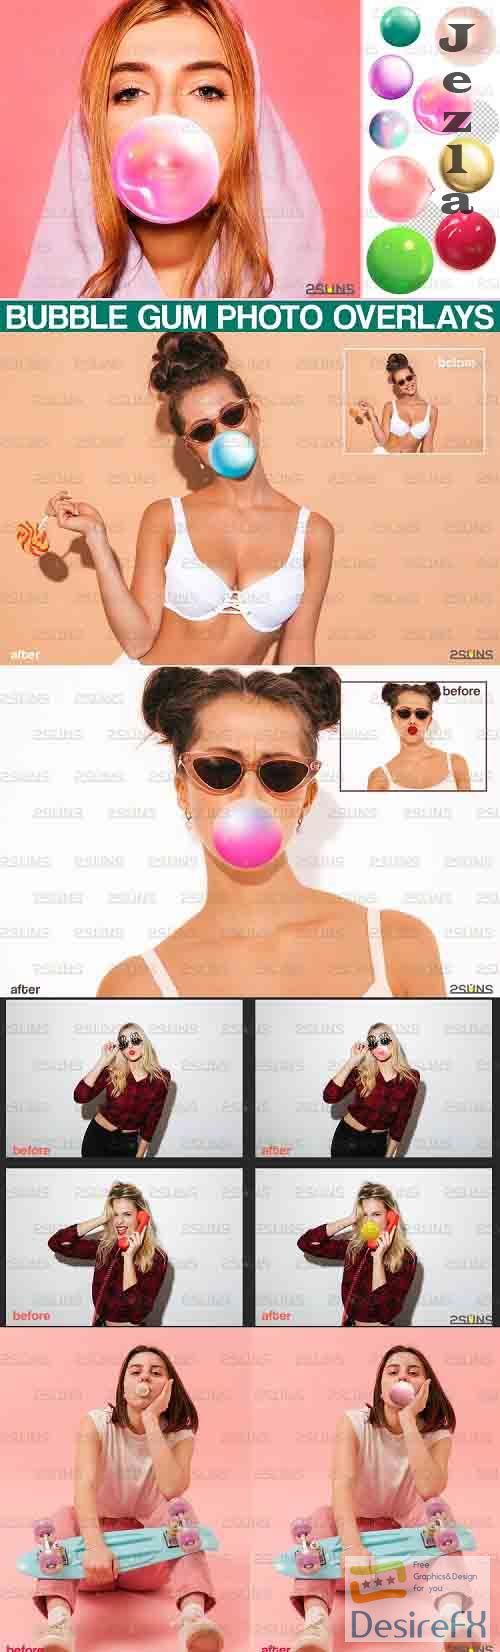 100 Blowing Bubble Gum Photo overlays - 665359